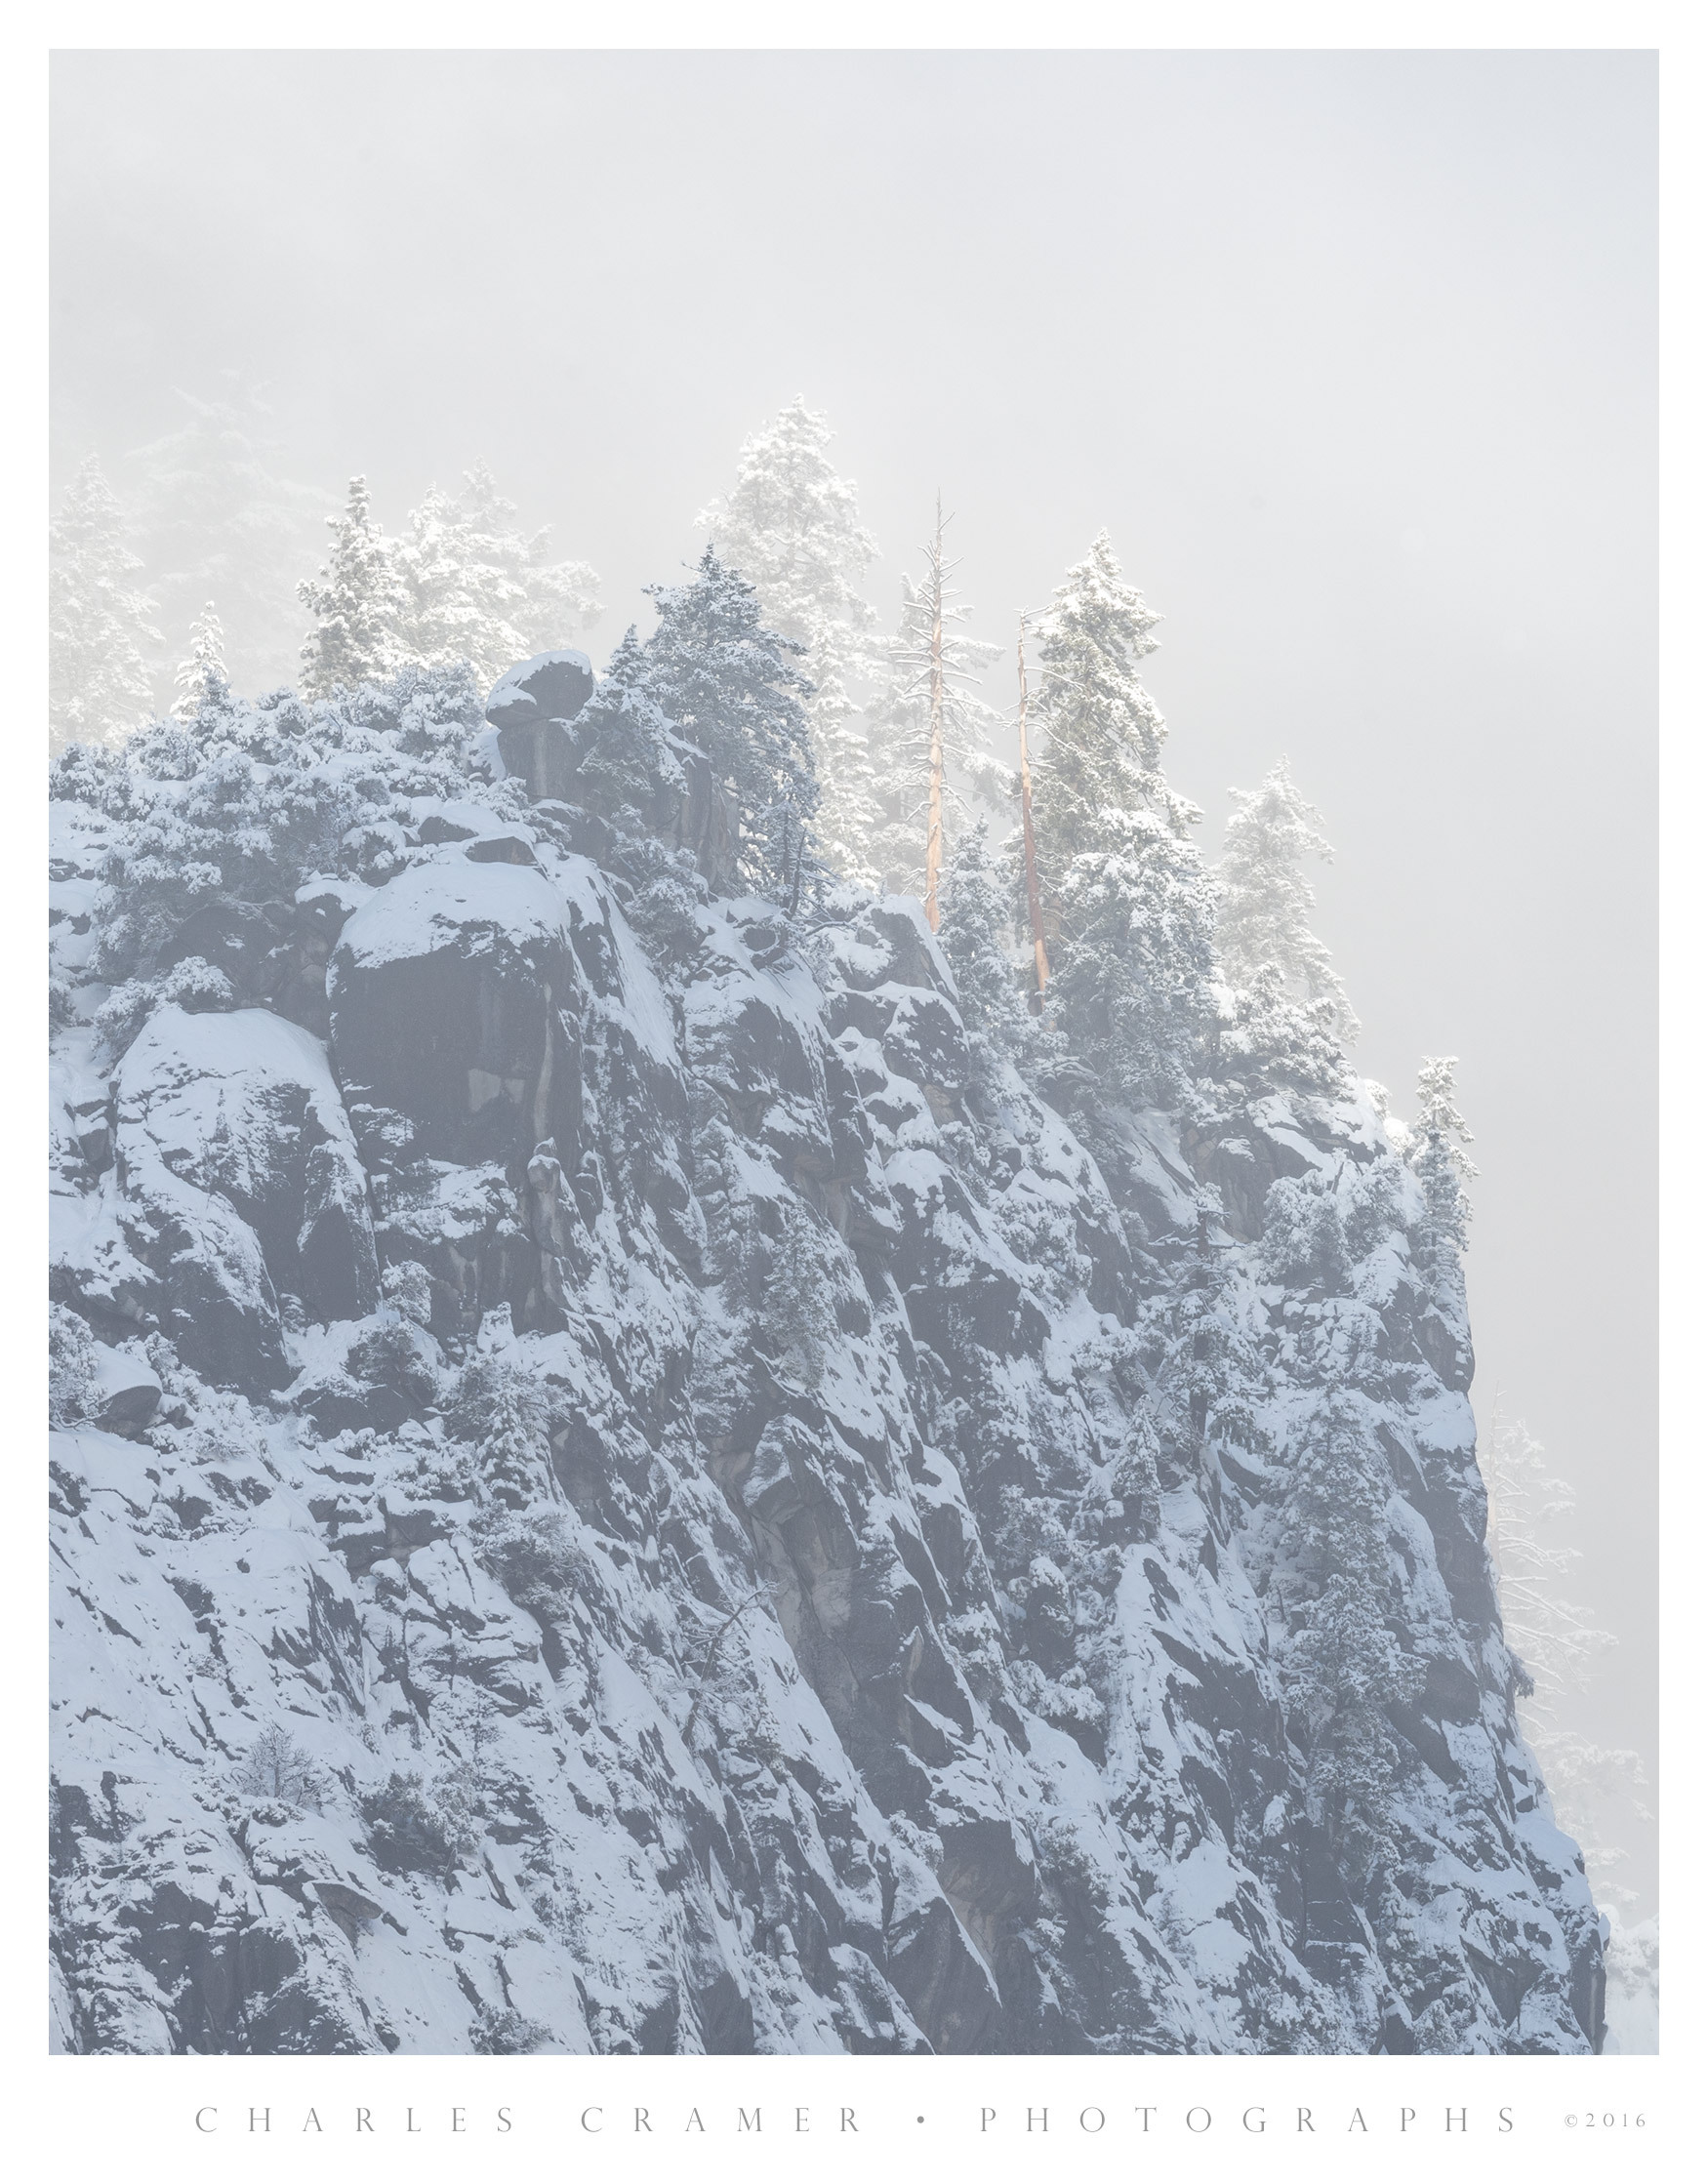 Clearing Snowstorm, Valley Cliffs, Yosemite